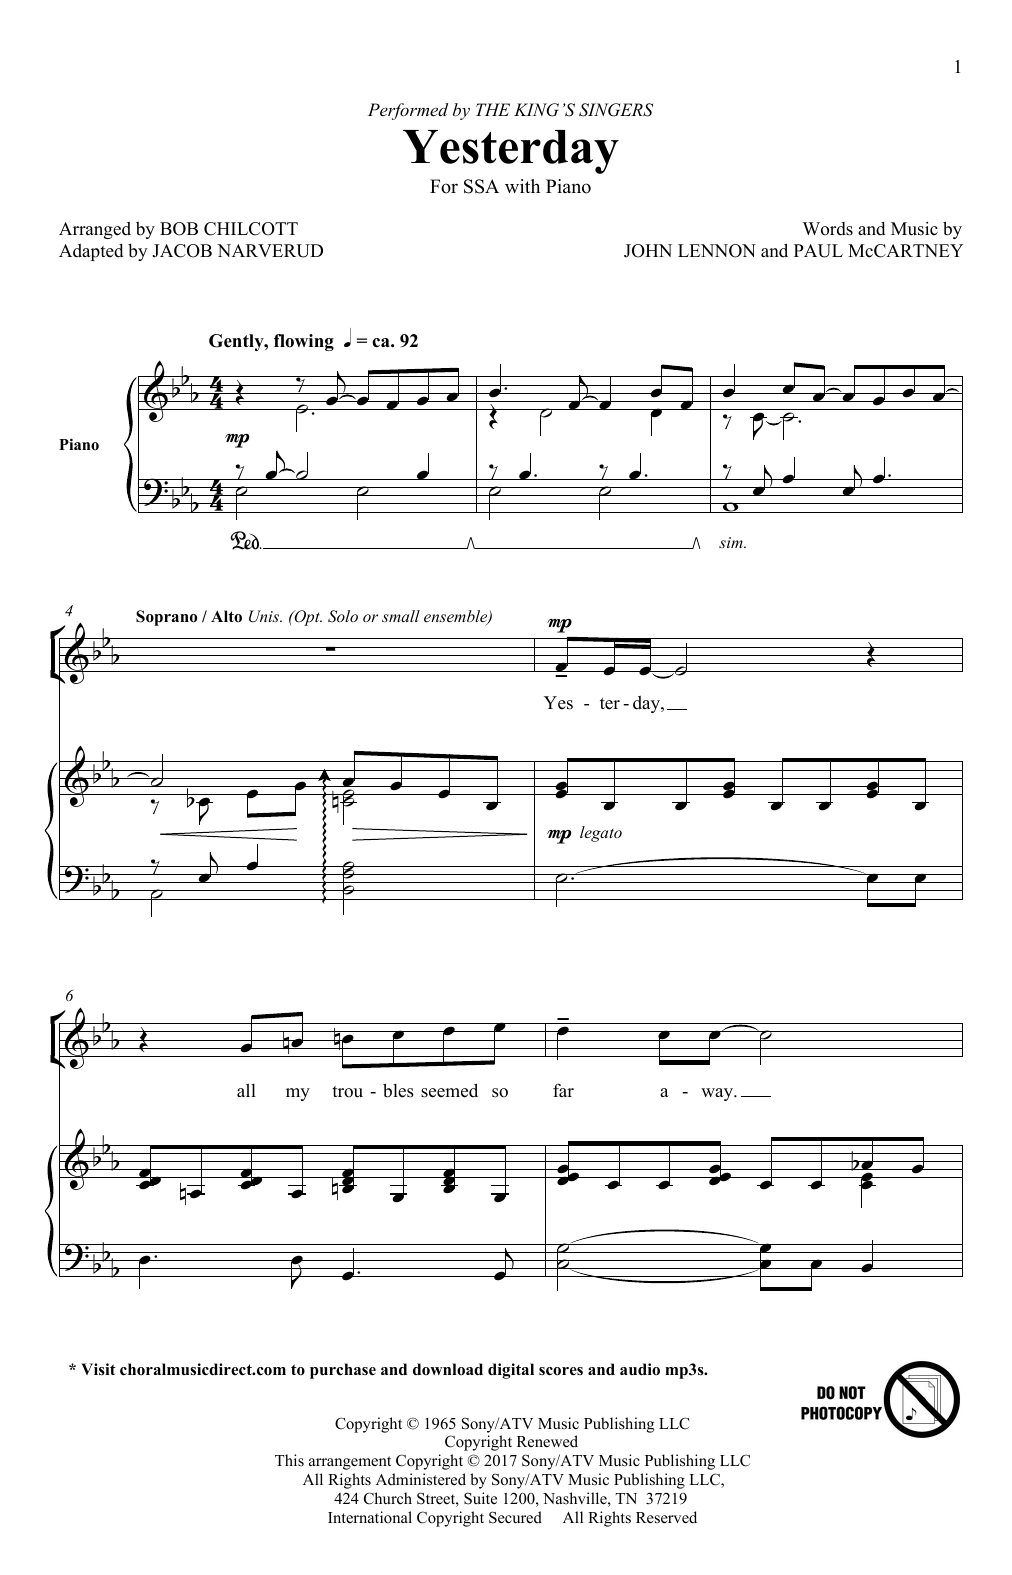 Download The Beatles Yesterday (adapt. Jacob Narverud) Sheet Music